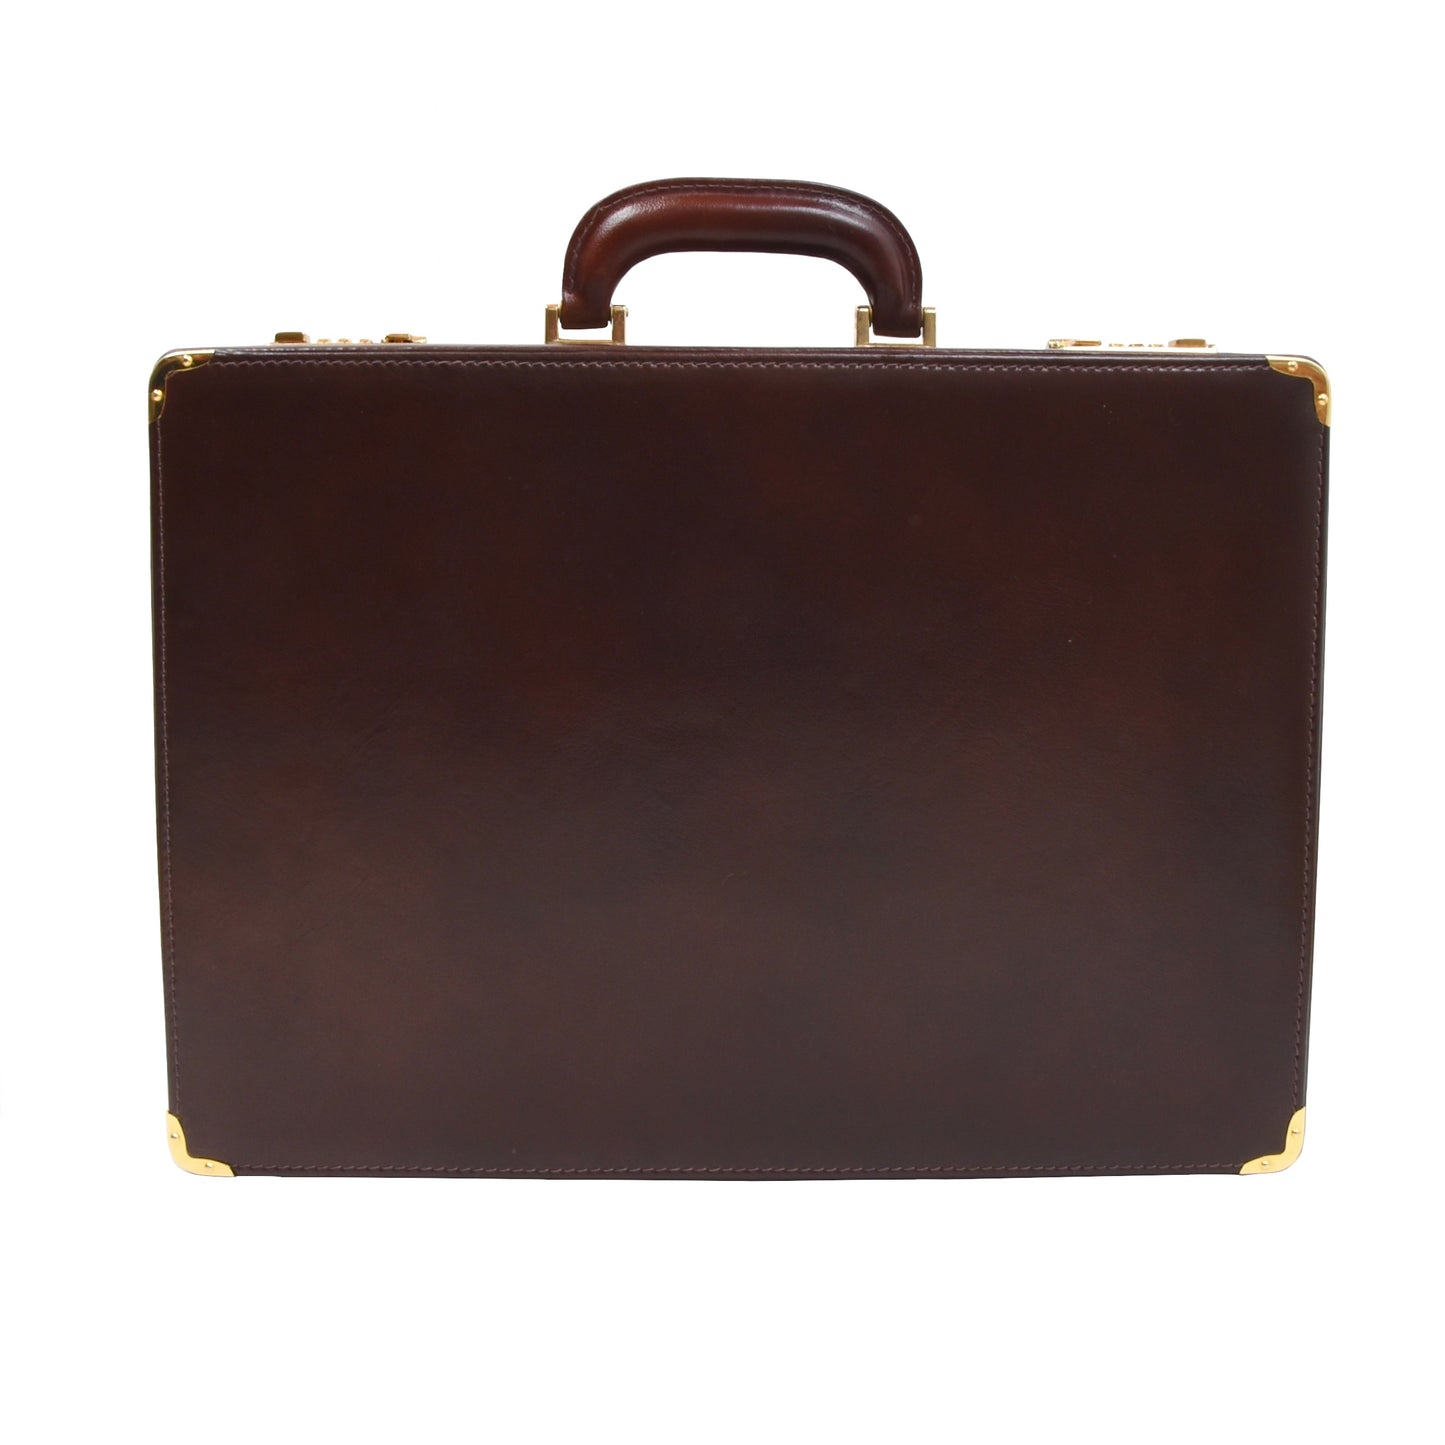 Executive Leather Briefcase - Brown